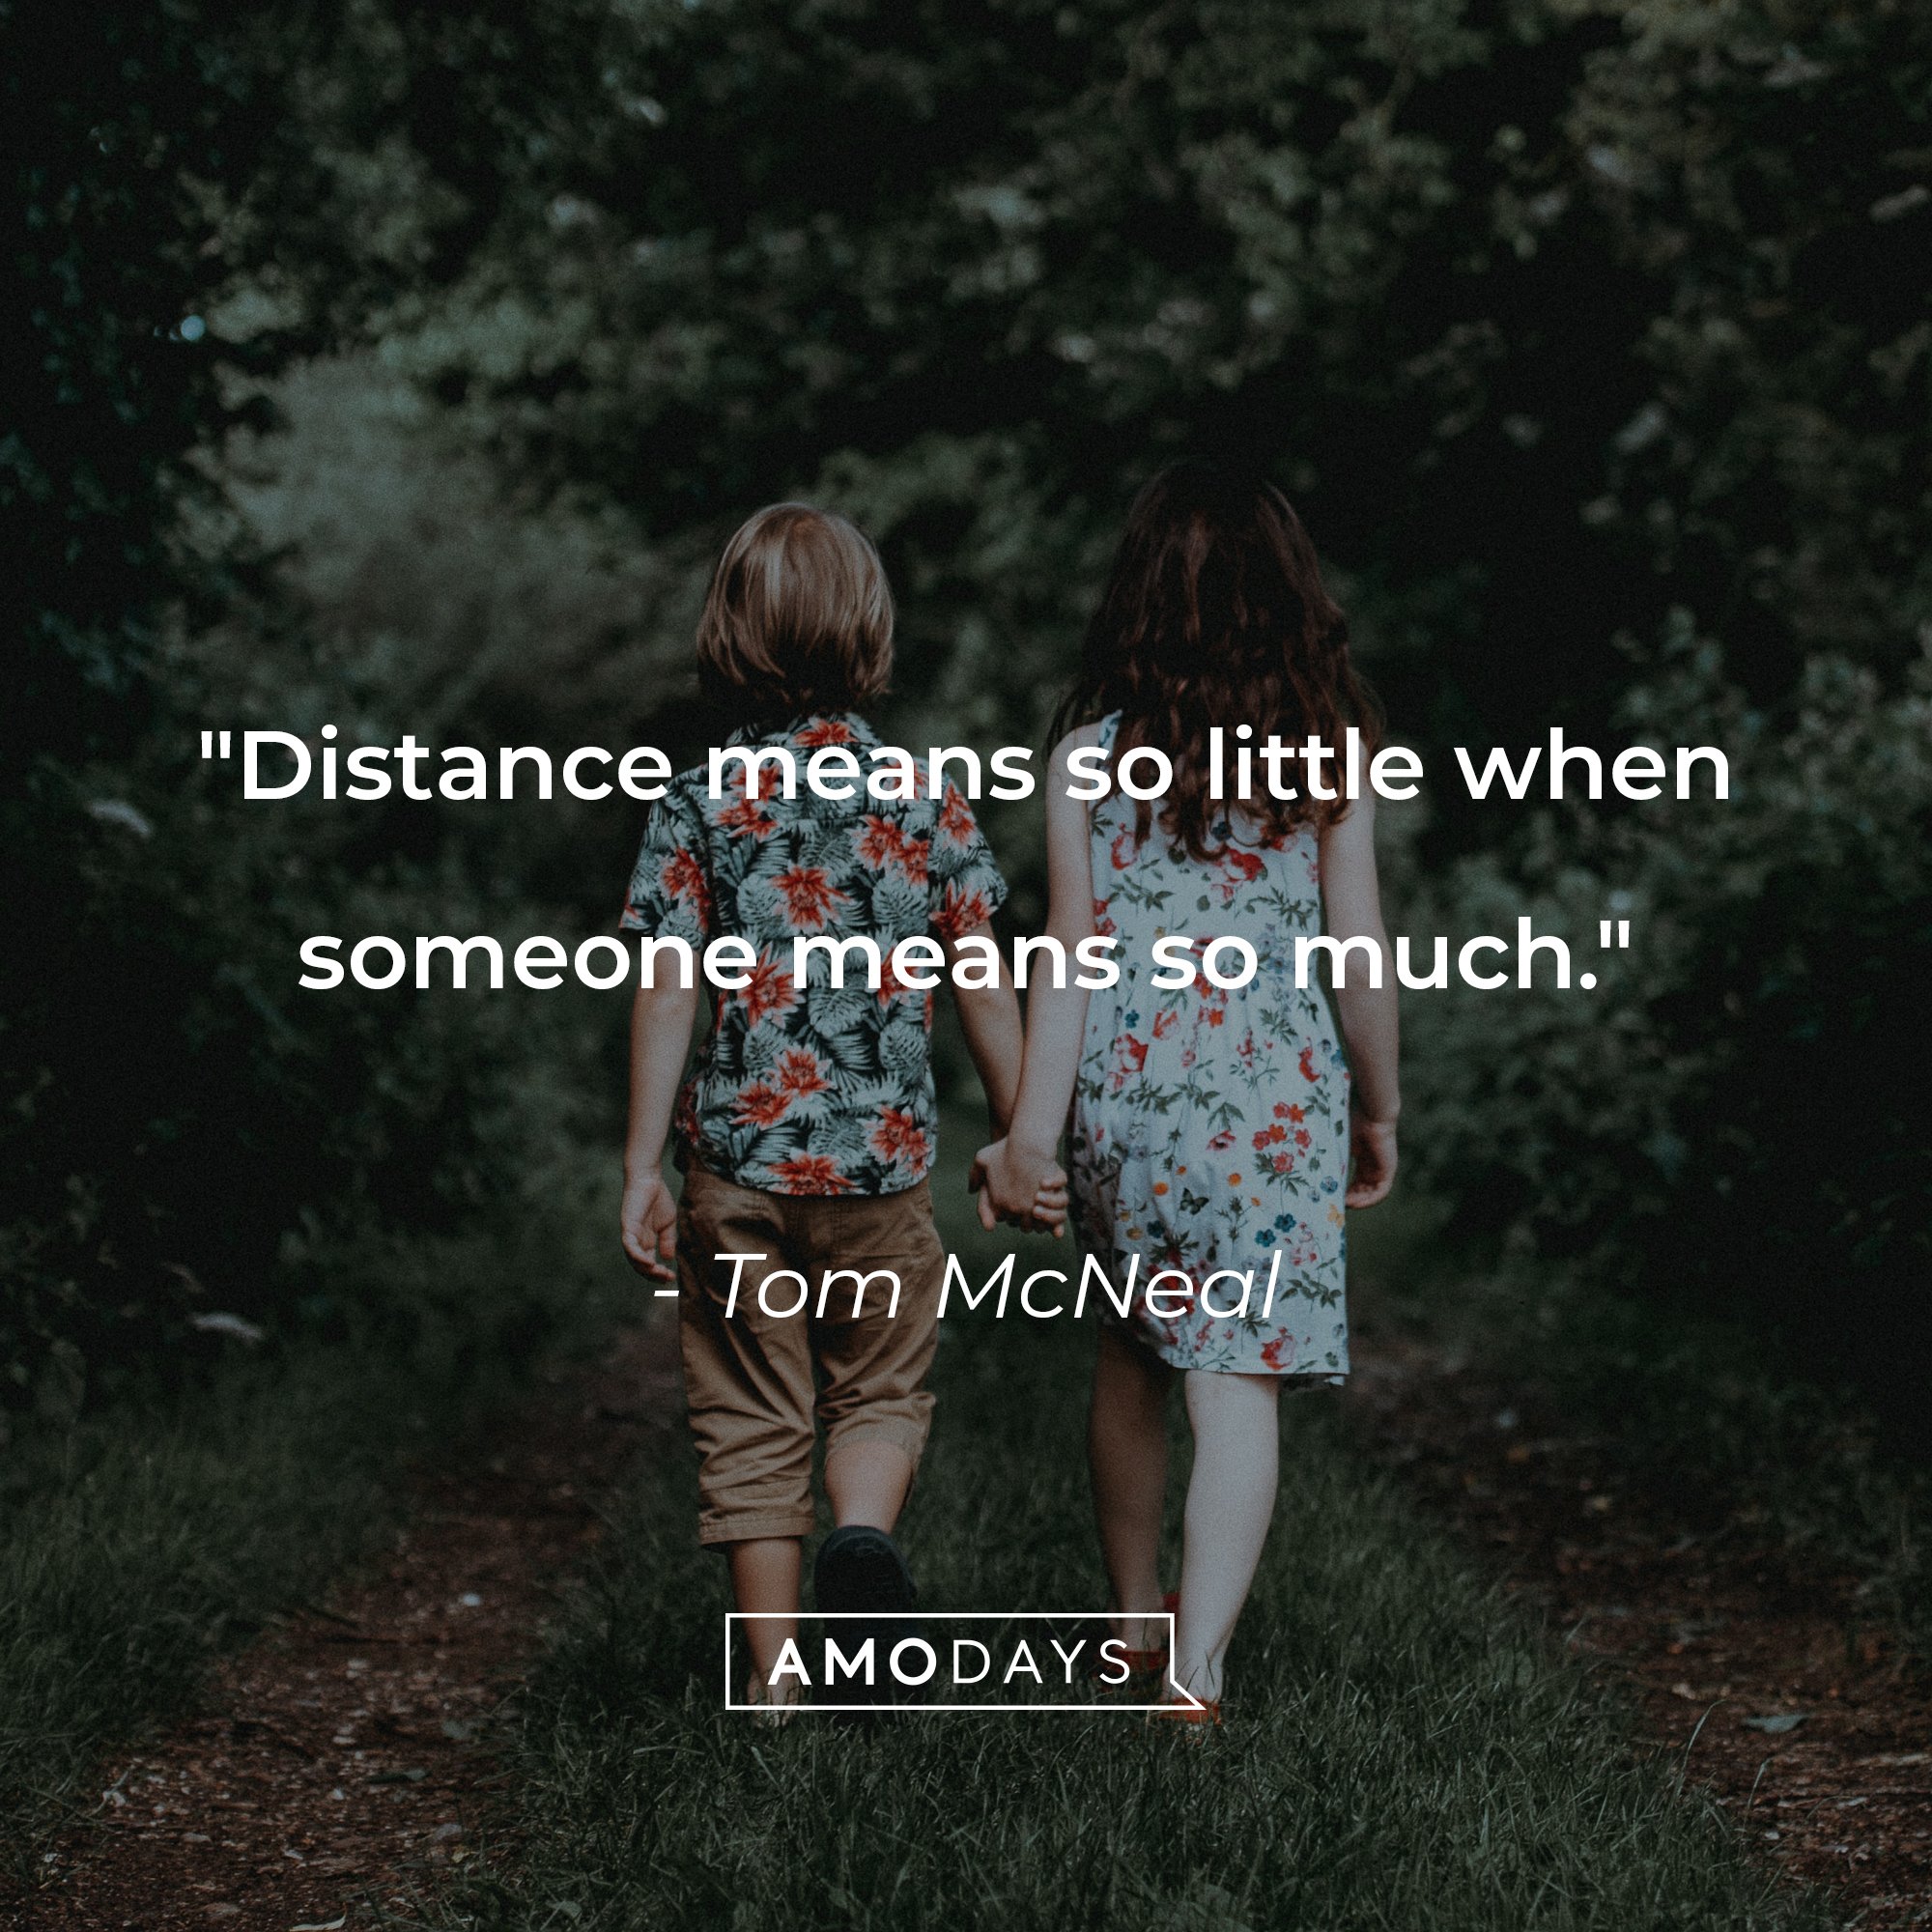 Tom McNeal's quote: "Distance means so little when someone means so much." | Image: AmoDays